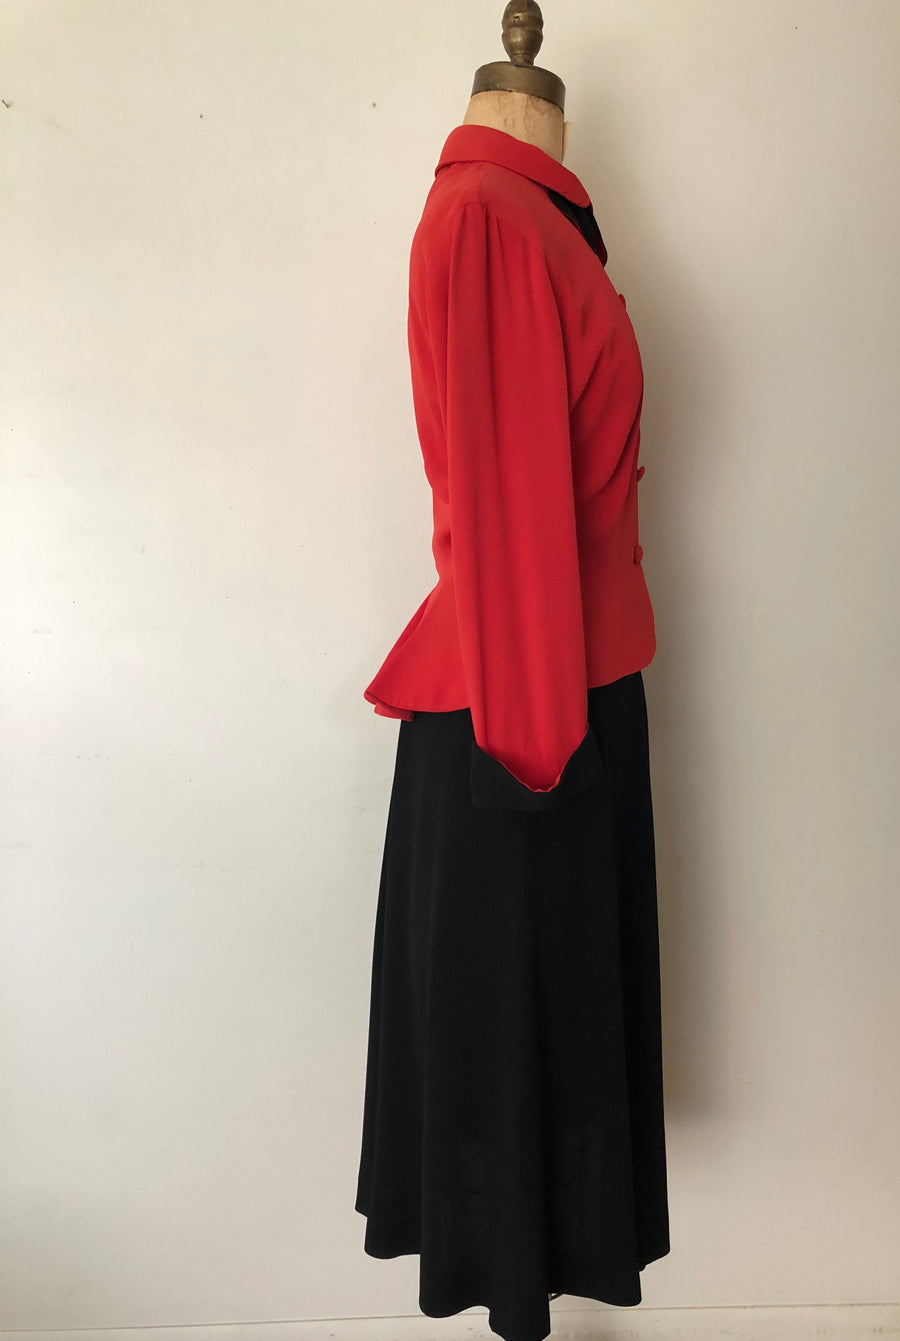 1940's Red & Black Rayon Suit - Size Small